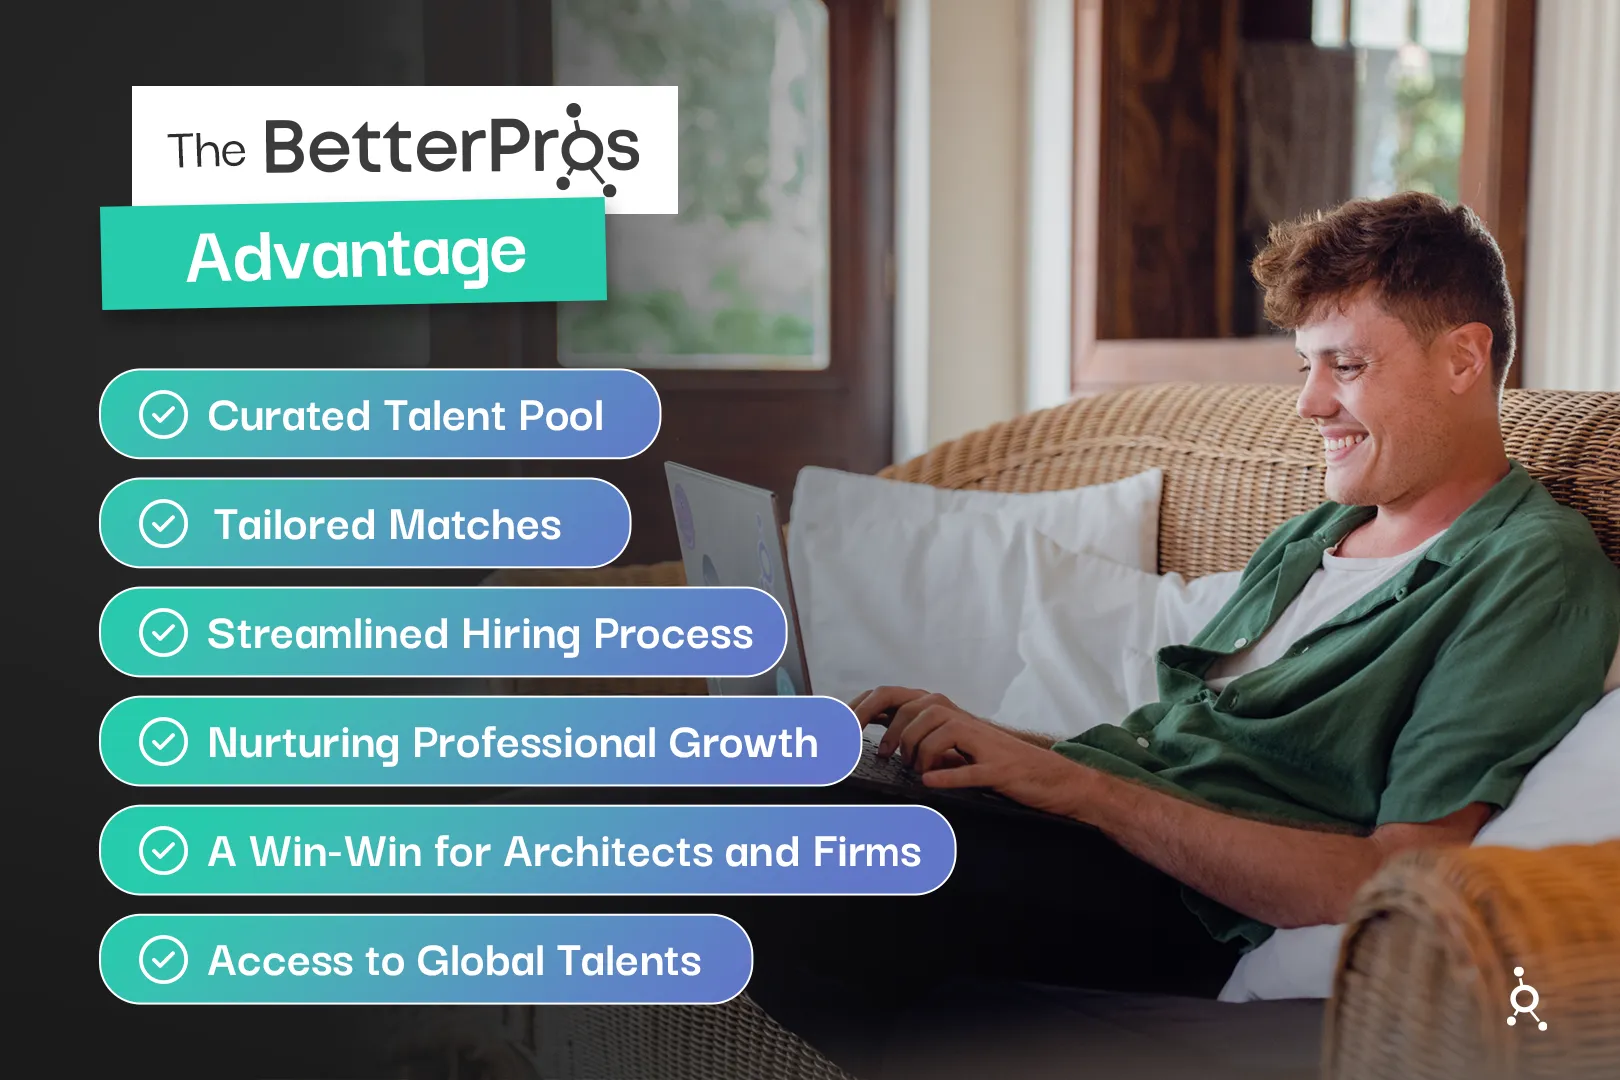 The BetterPros Advantage for Find Remote Architects